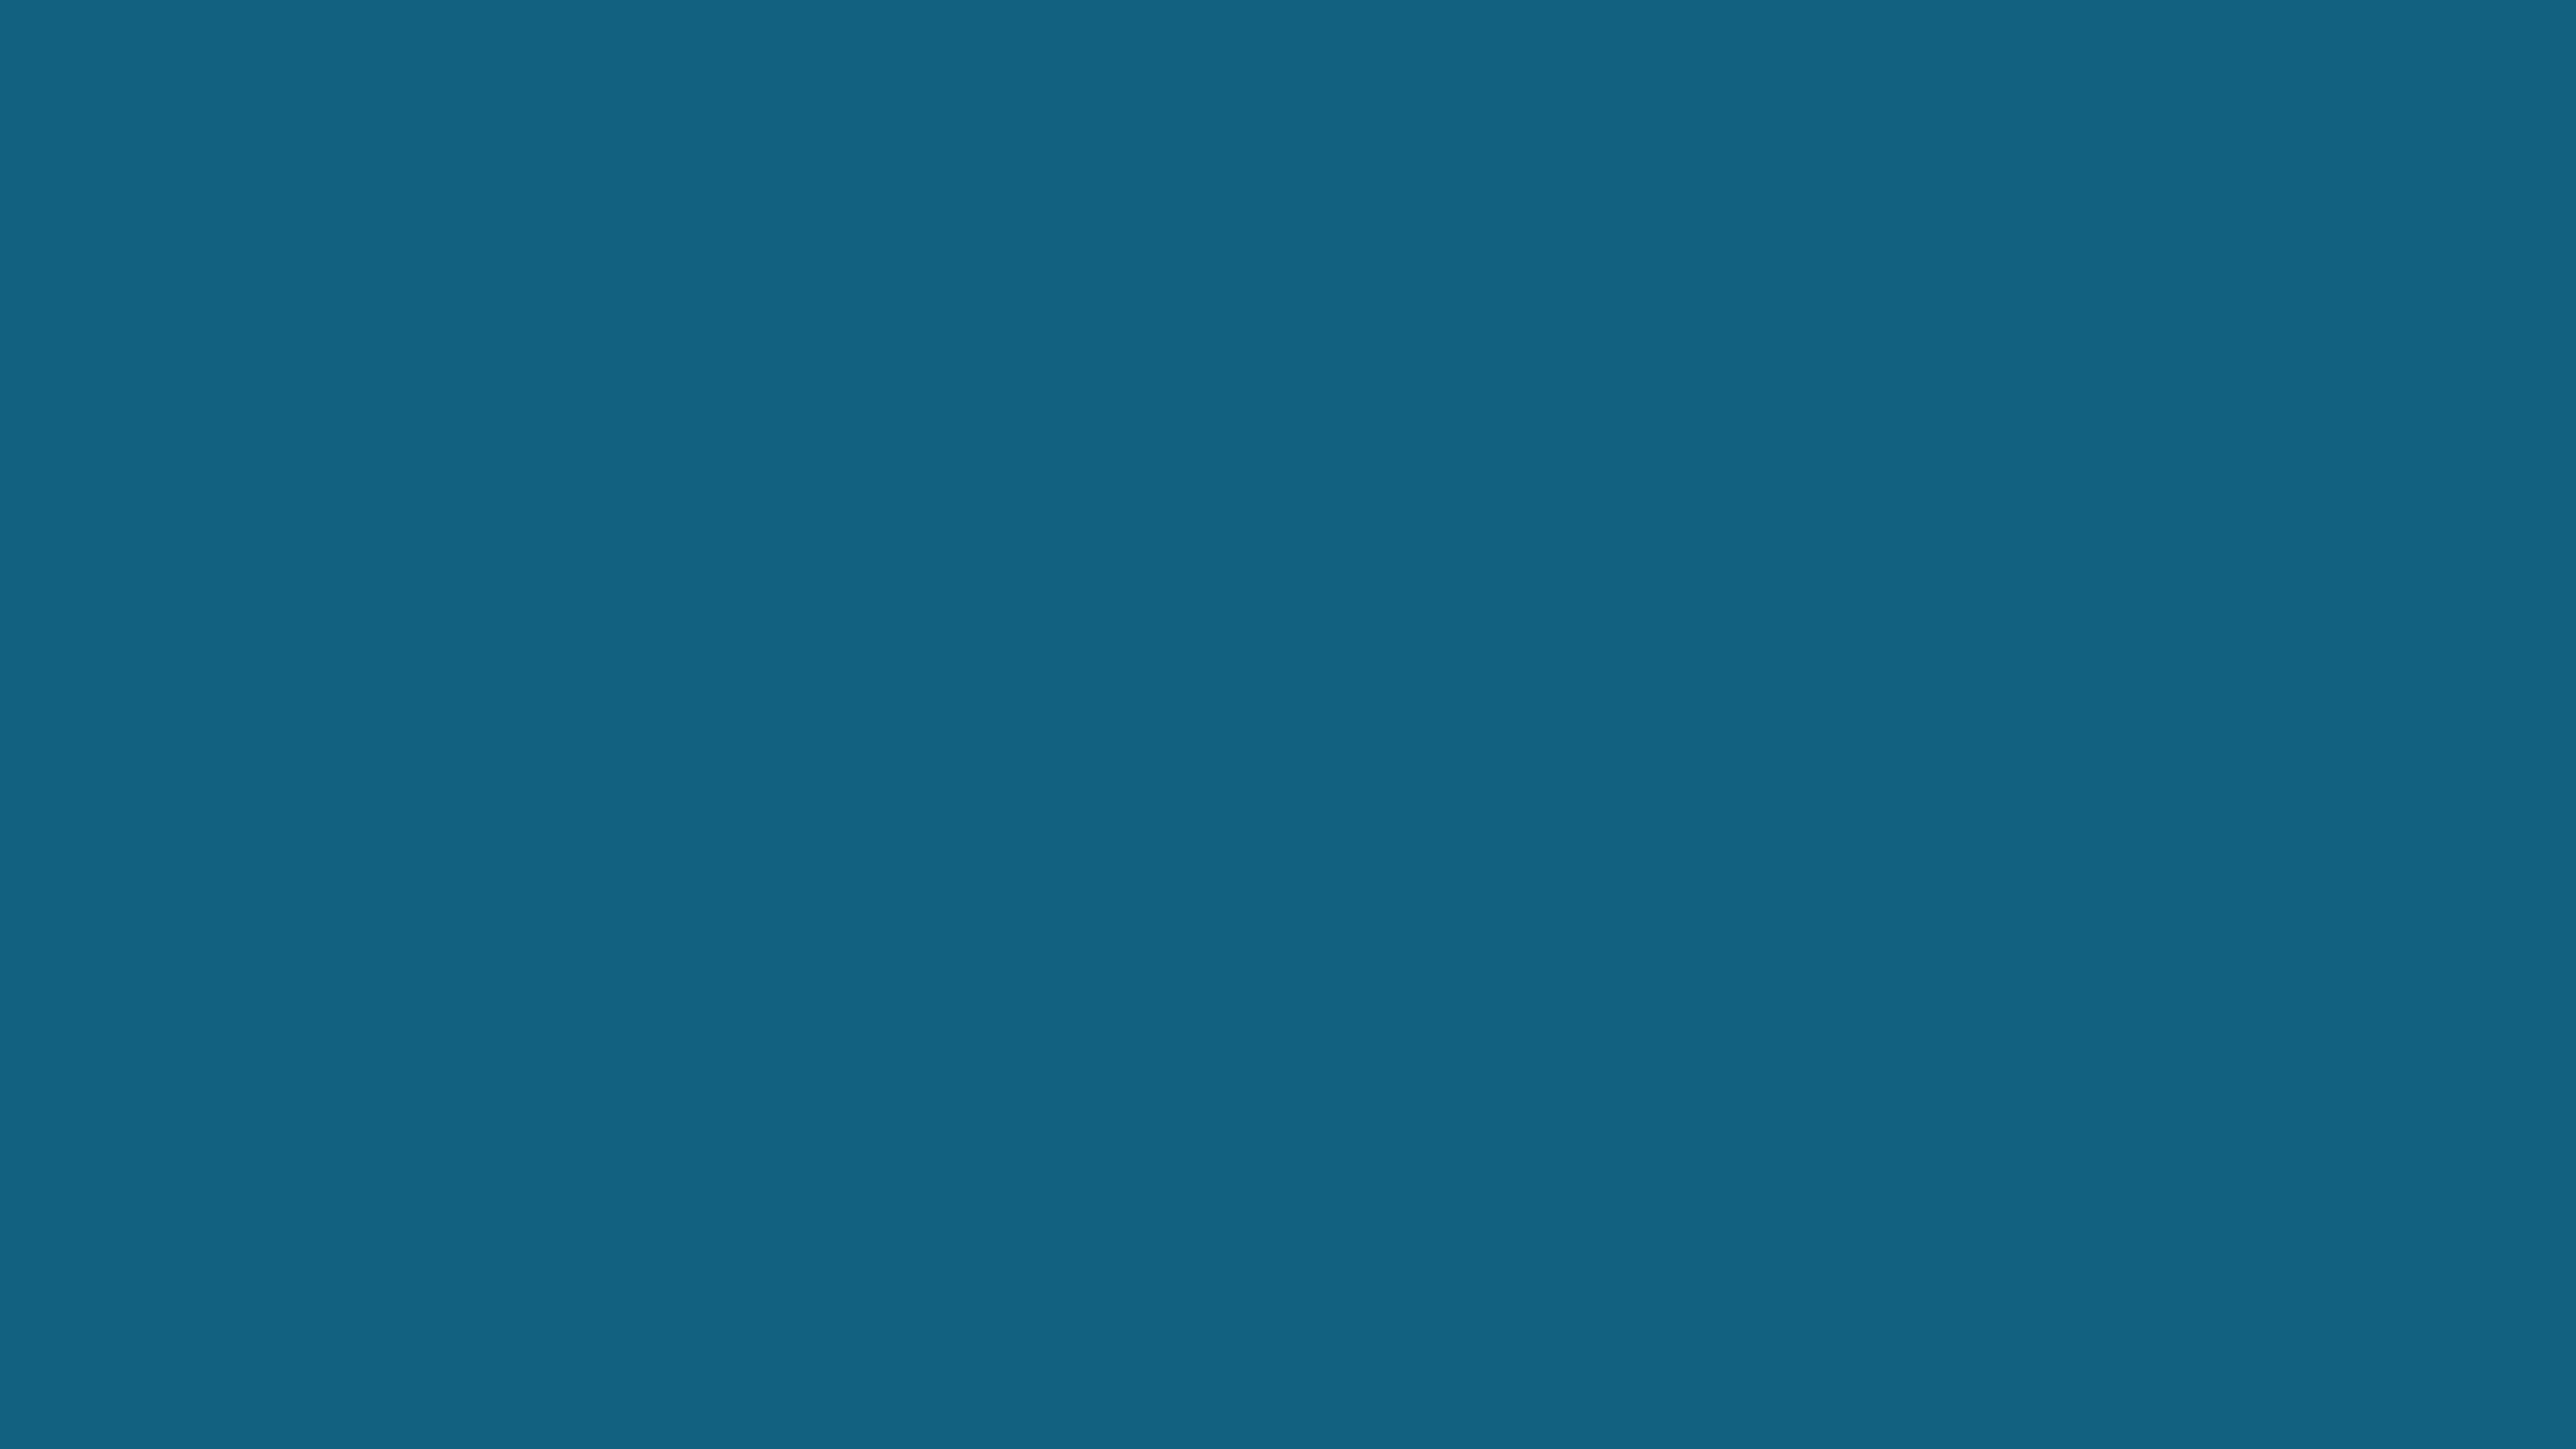 4096x2304 Blue Sapphire Solid Color Background